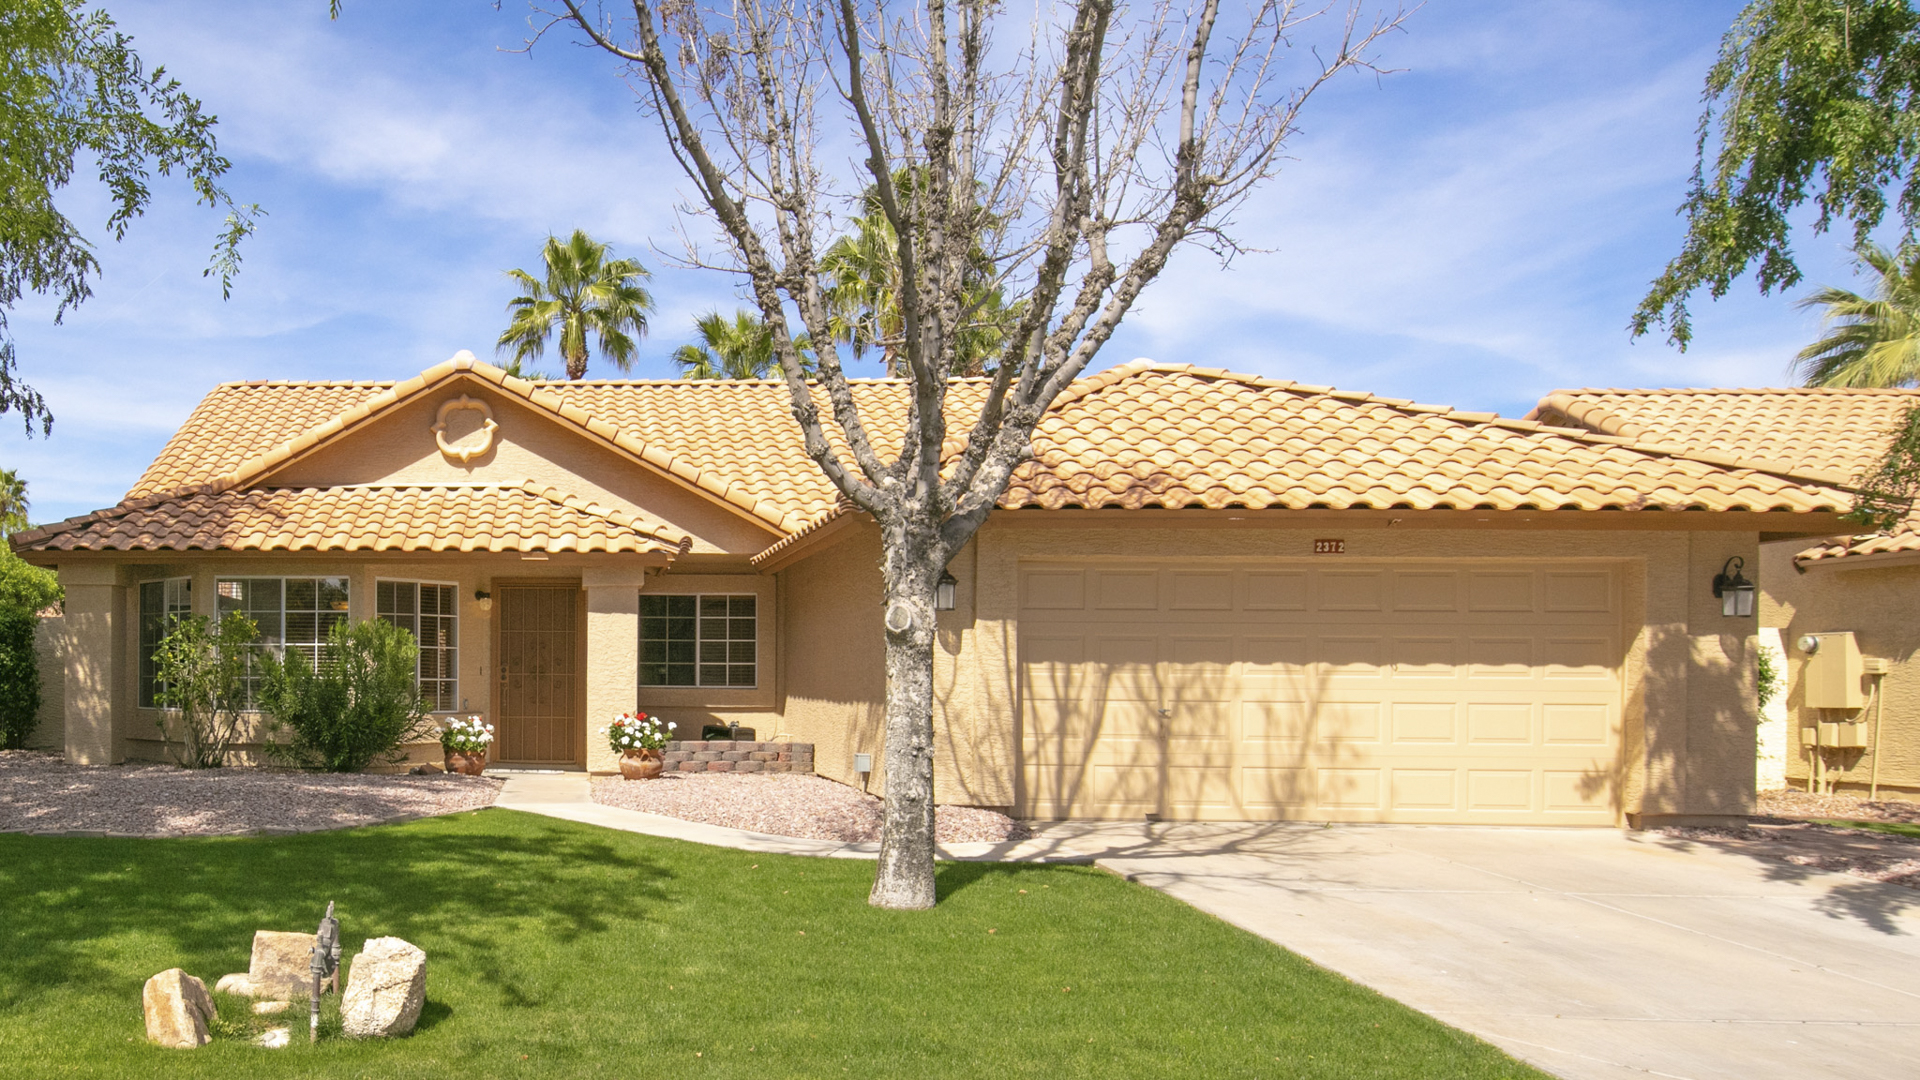 New Listing! 2372 W Redwood Dr. Chandler, AZ 85248 - Waters Edge at Ocotillo | Amy Jones Group